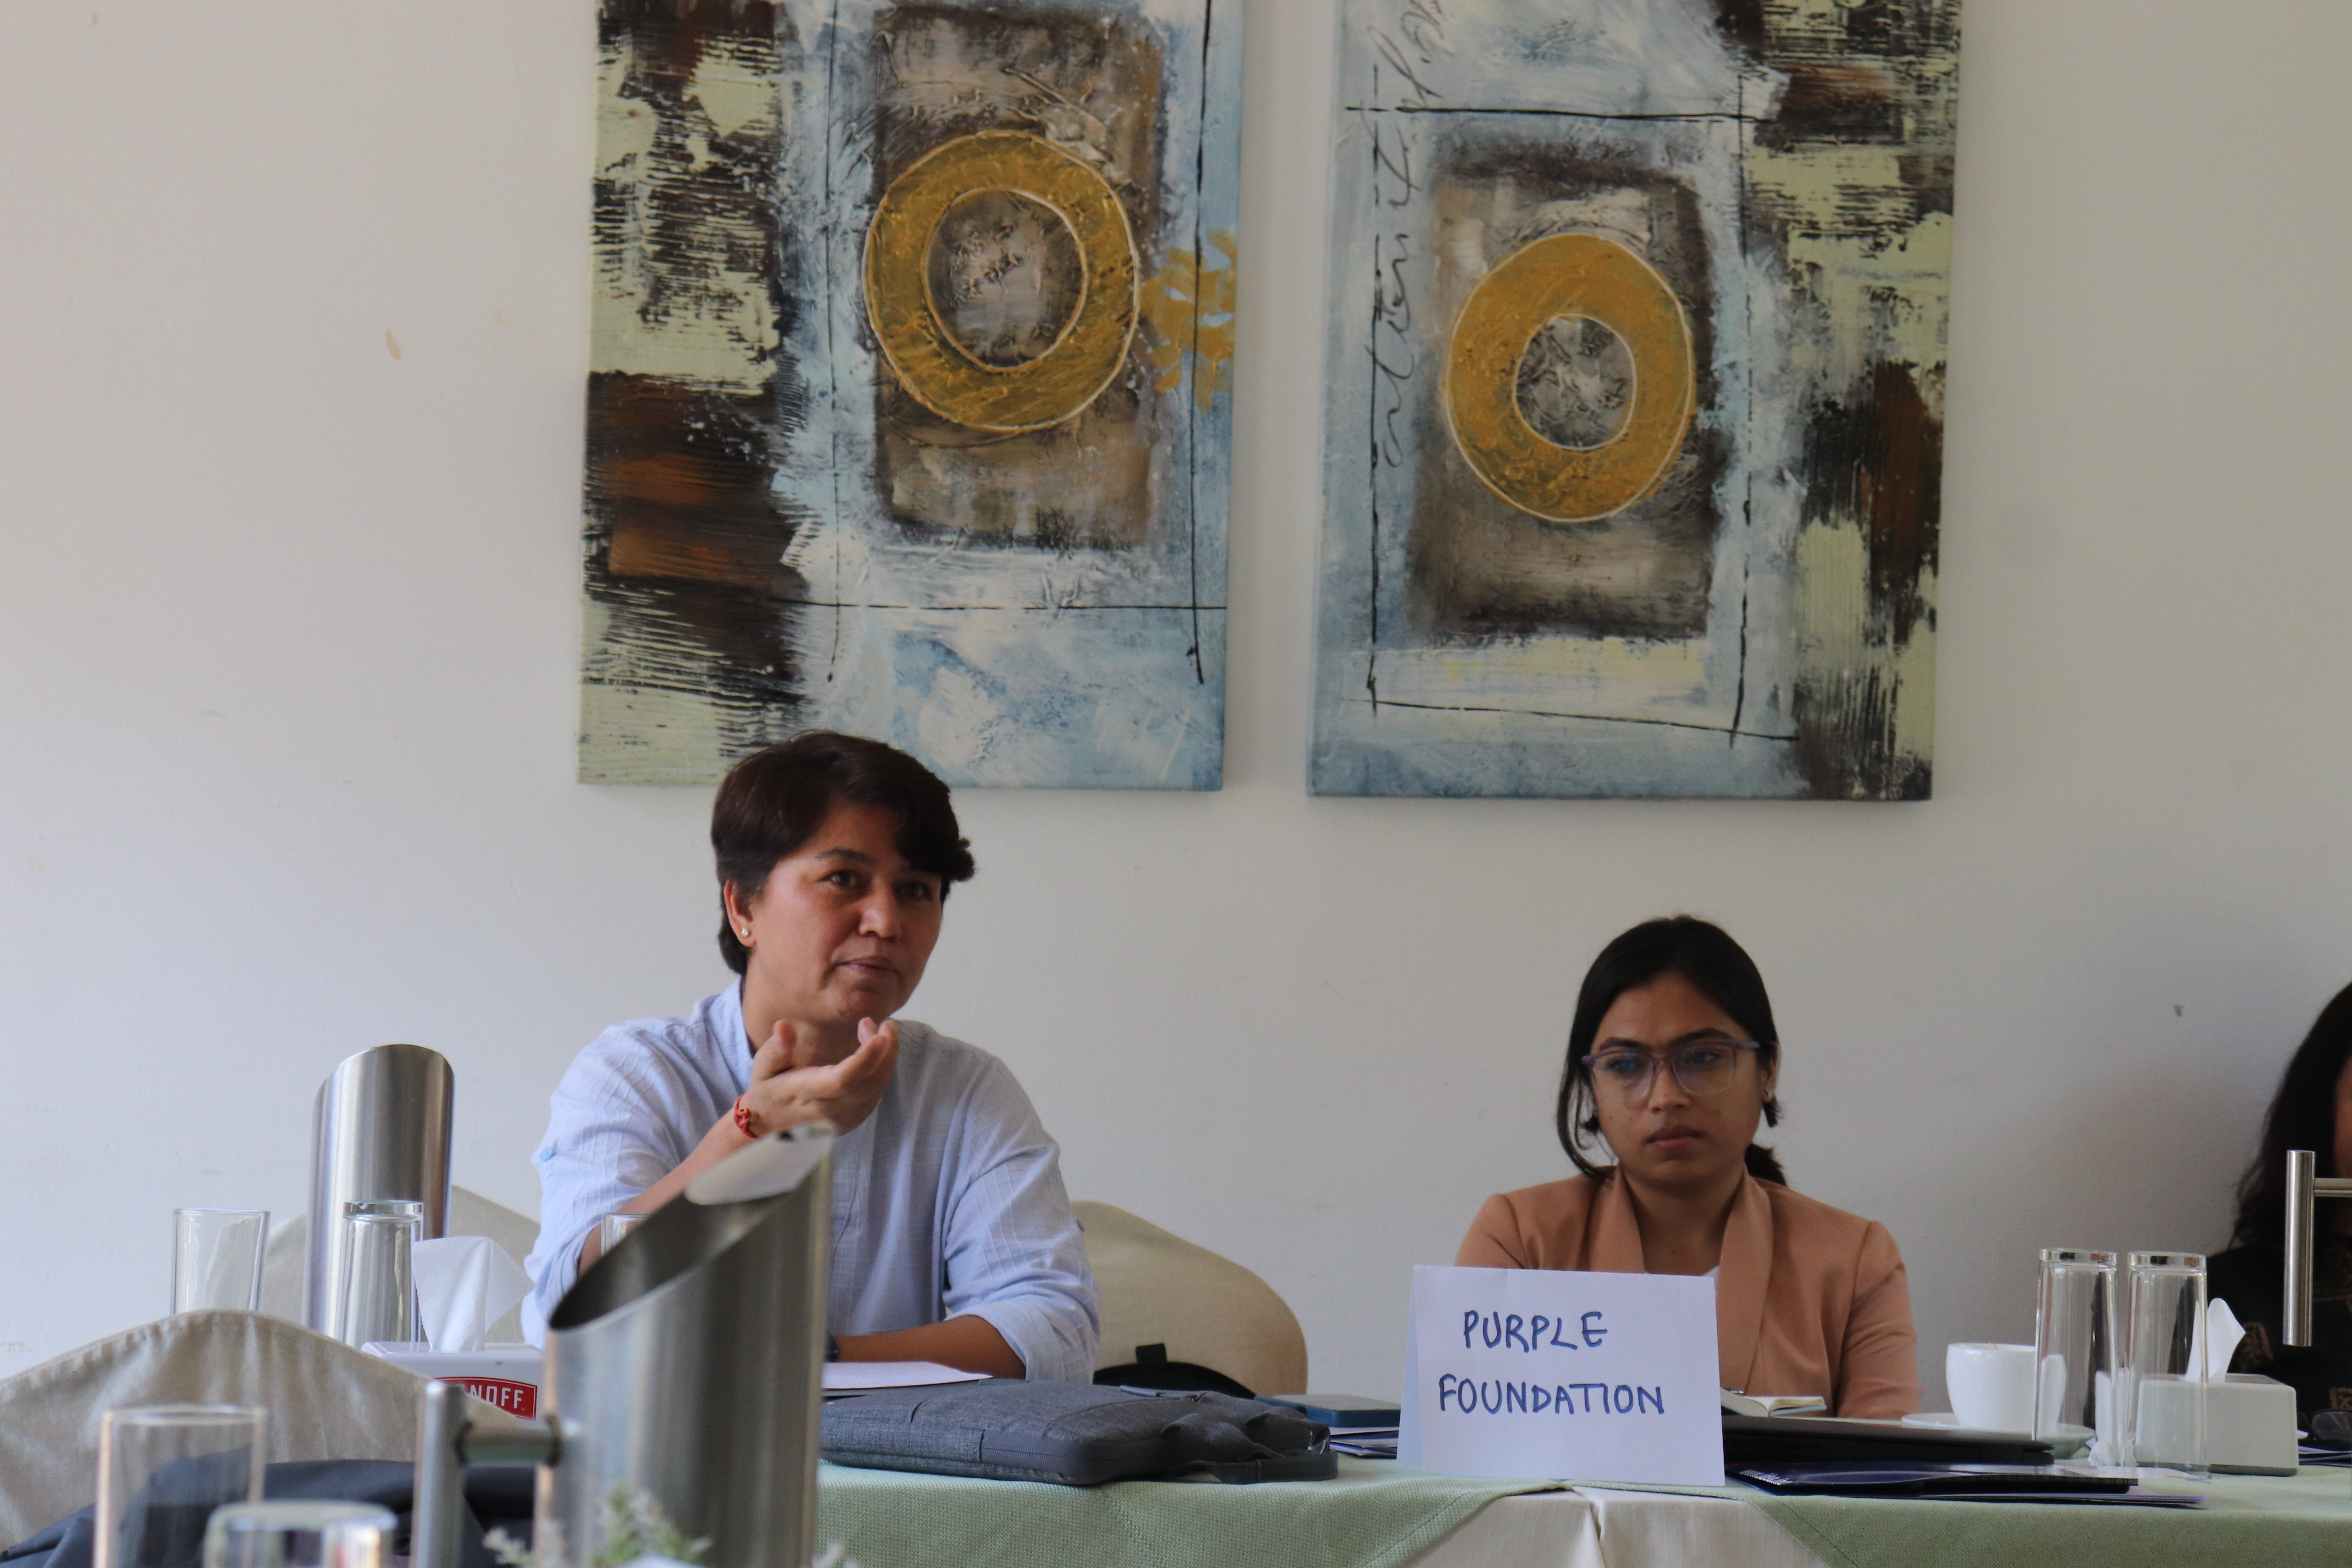 Sirjana Kafle (left), the Executive Director of Purple Foundation, speaks at an (orientation) event in Nepal on 28 September 2023 to kick off the project implementation, as Monika Paudel, a civil society organization mentor for her organization, looks on. Credit: International IDEA